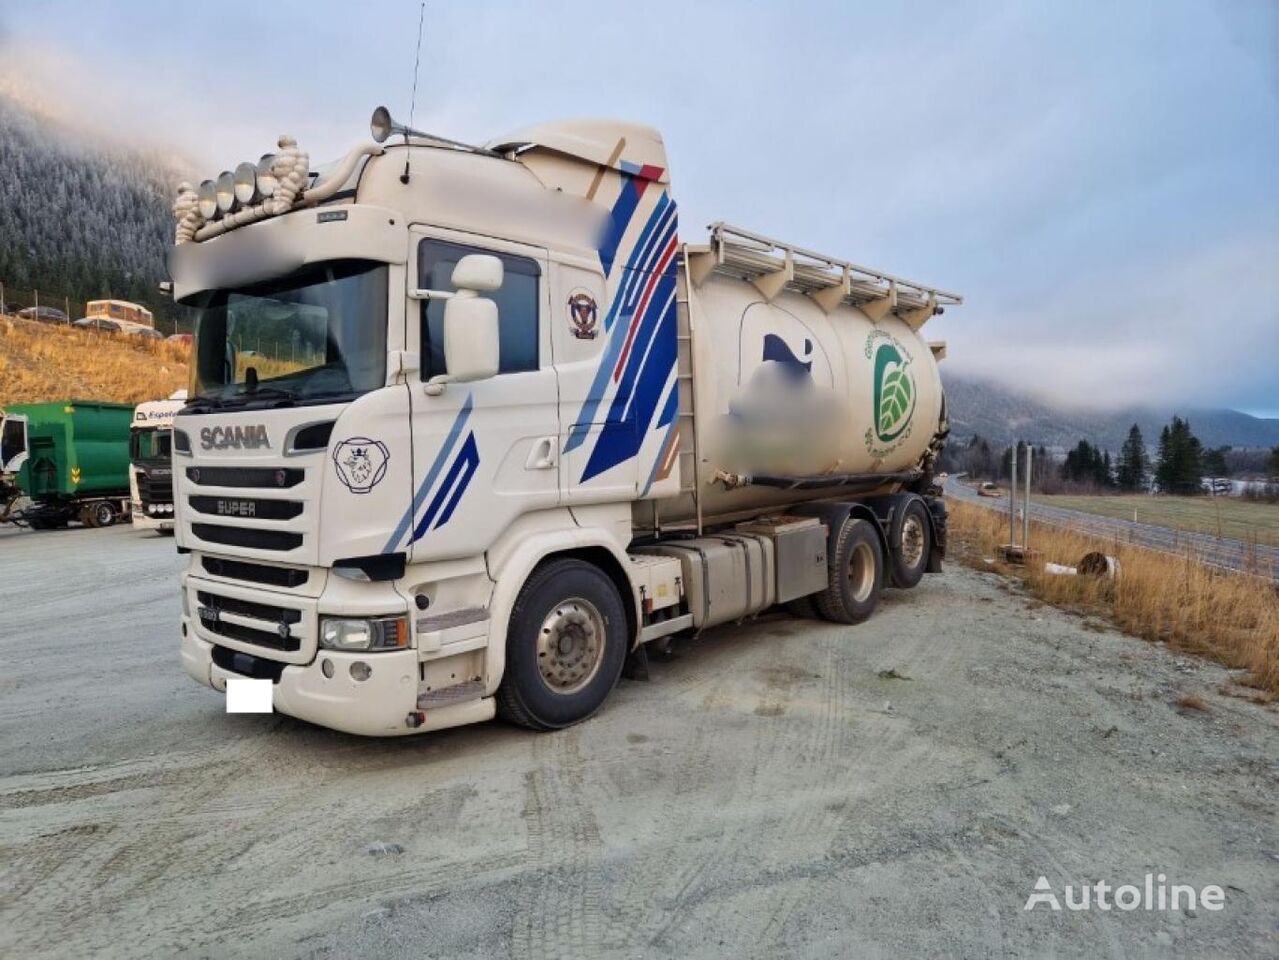 Scania R560, Grain or Pellet silos, Works great, From 1 owner  fuel truck + fuel tank trailer